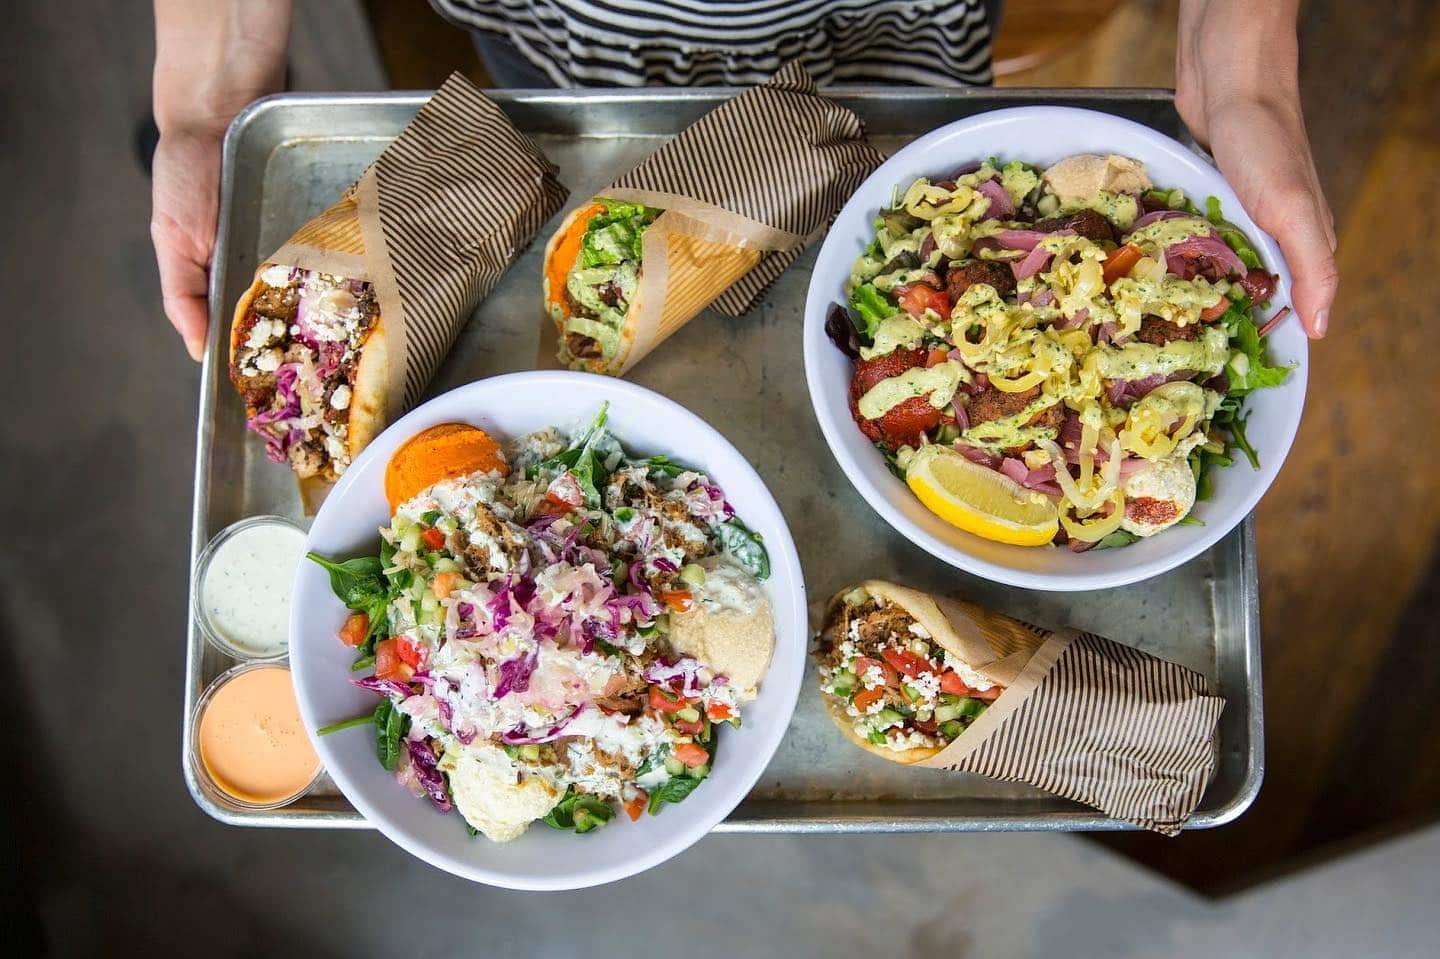 Delicious, healthy and affordable. Customization is core to the Cava experience with unlimited toppings, abundant spreads and a free side pita🤤